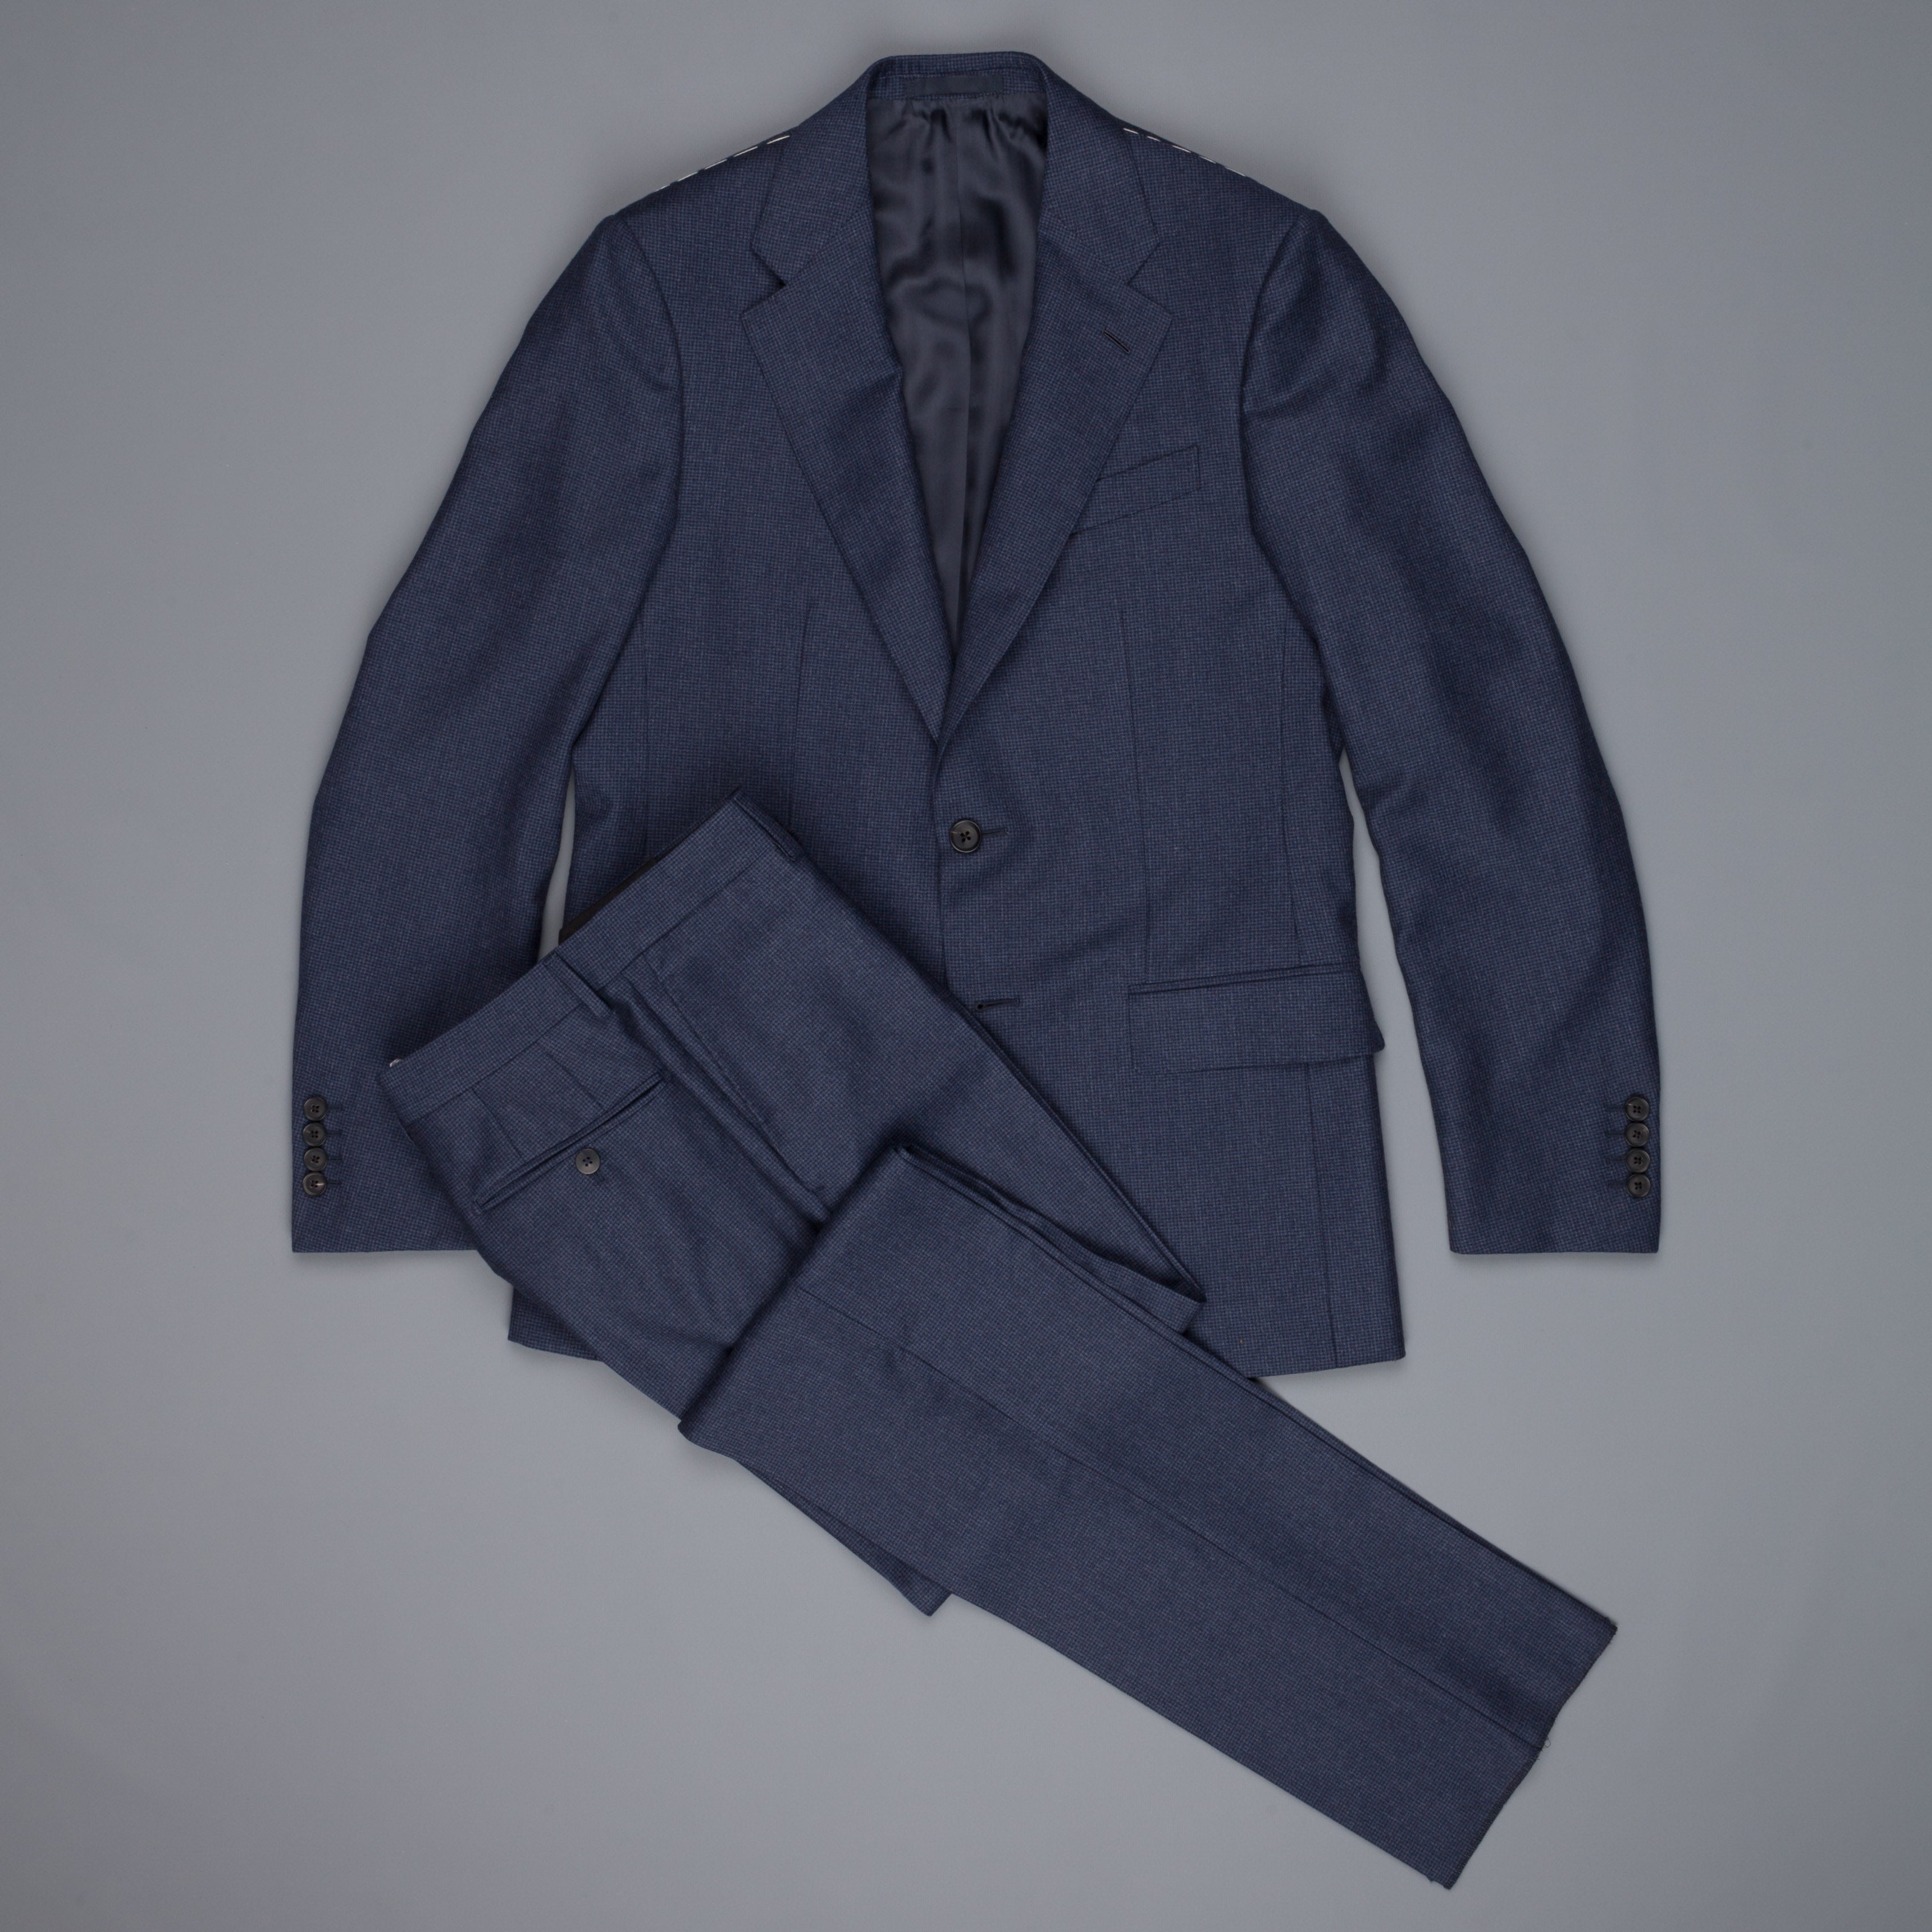 Caruso Nabucco Suit blu wool houndstooth